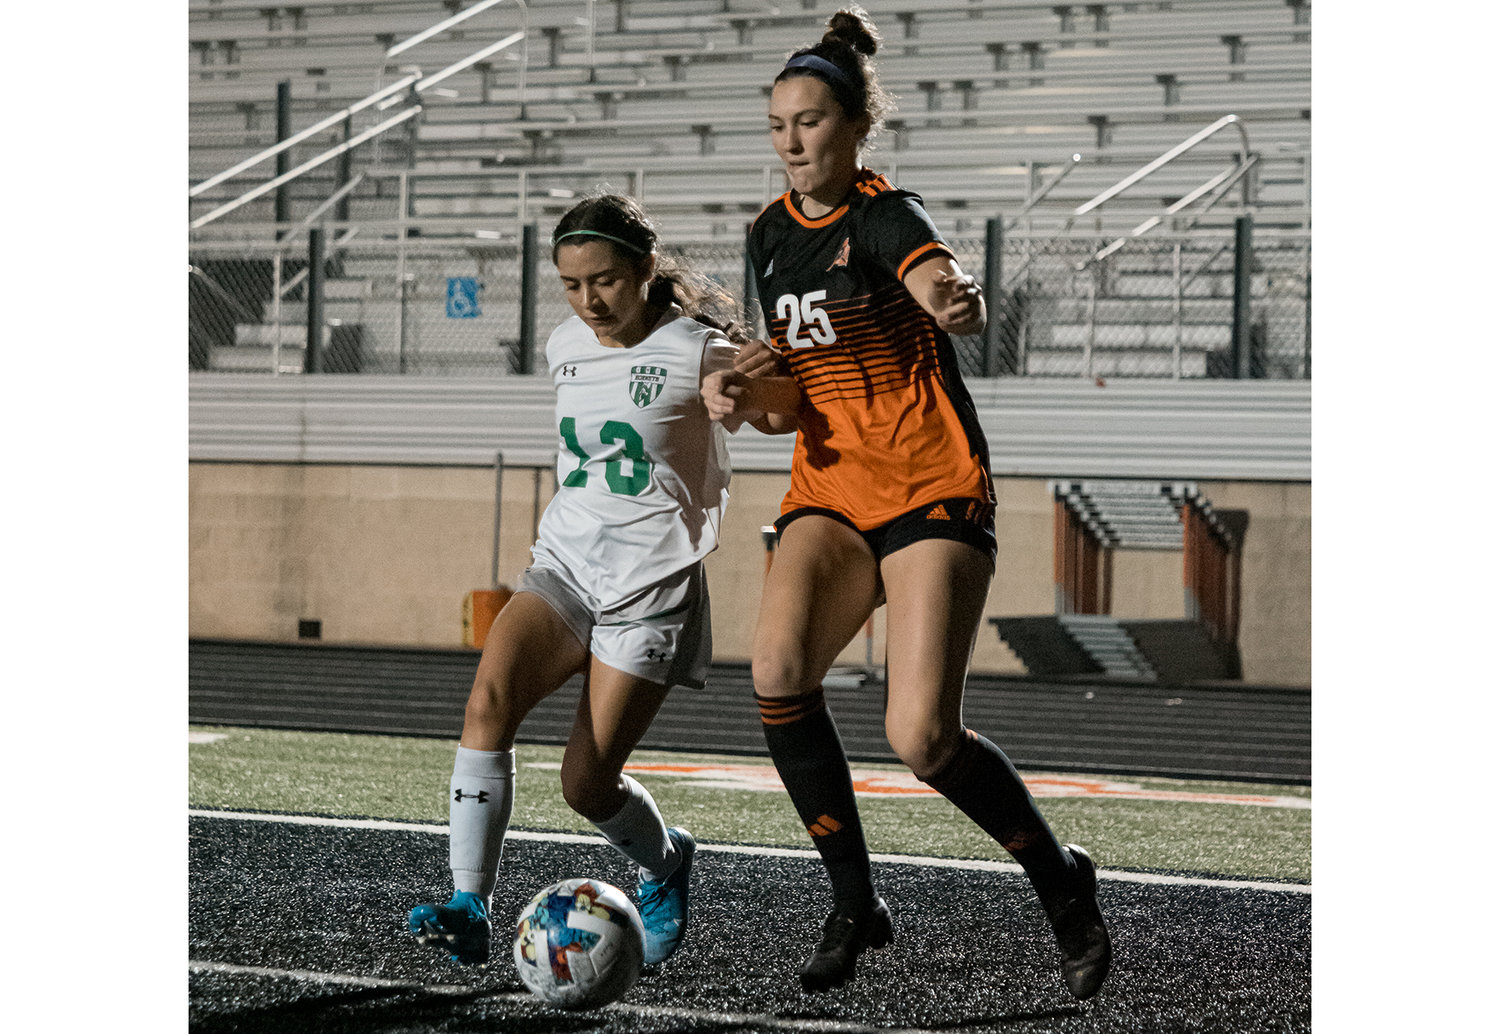 Georgia Zirbser works an Azle defender near the goal during the first half of the Ladycats 5-0 win on Tuesday, March 7.